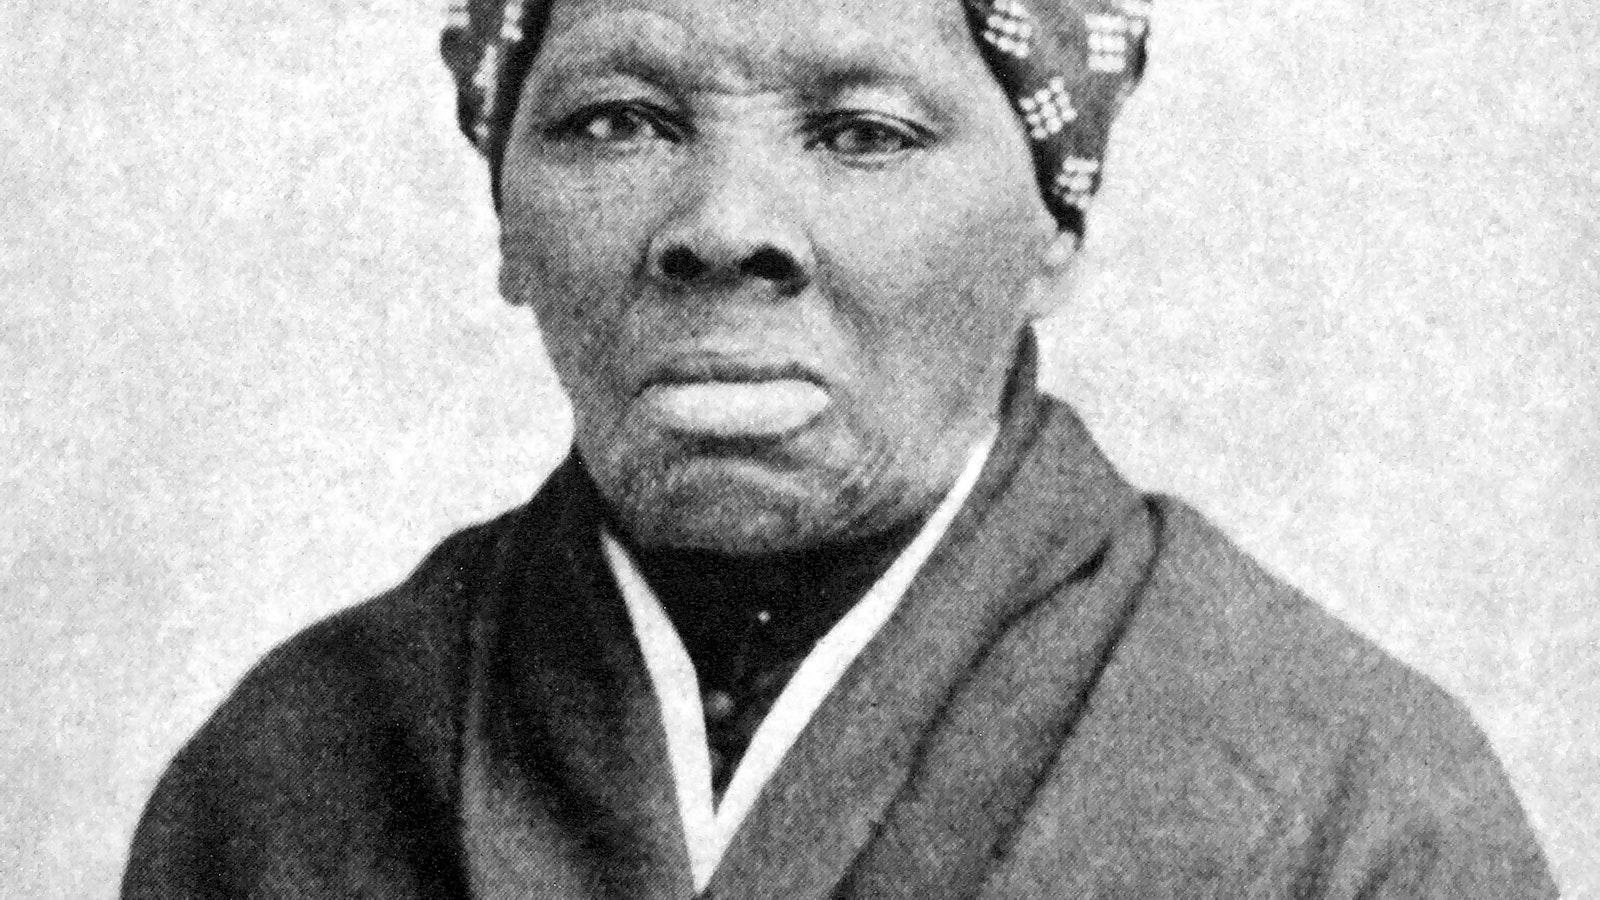 Black and white photograph of Harriet Tubman